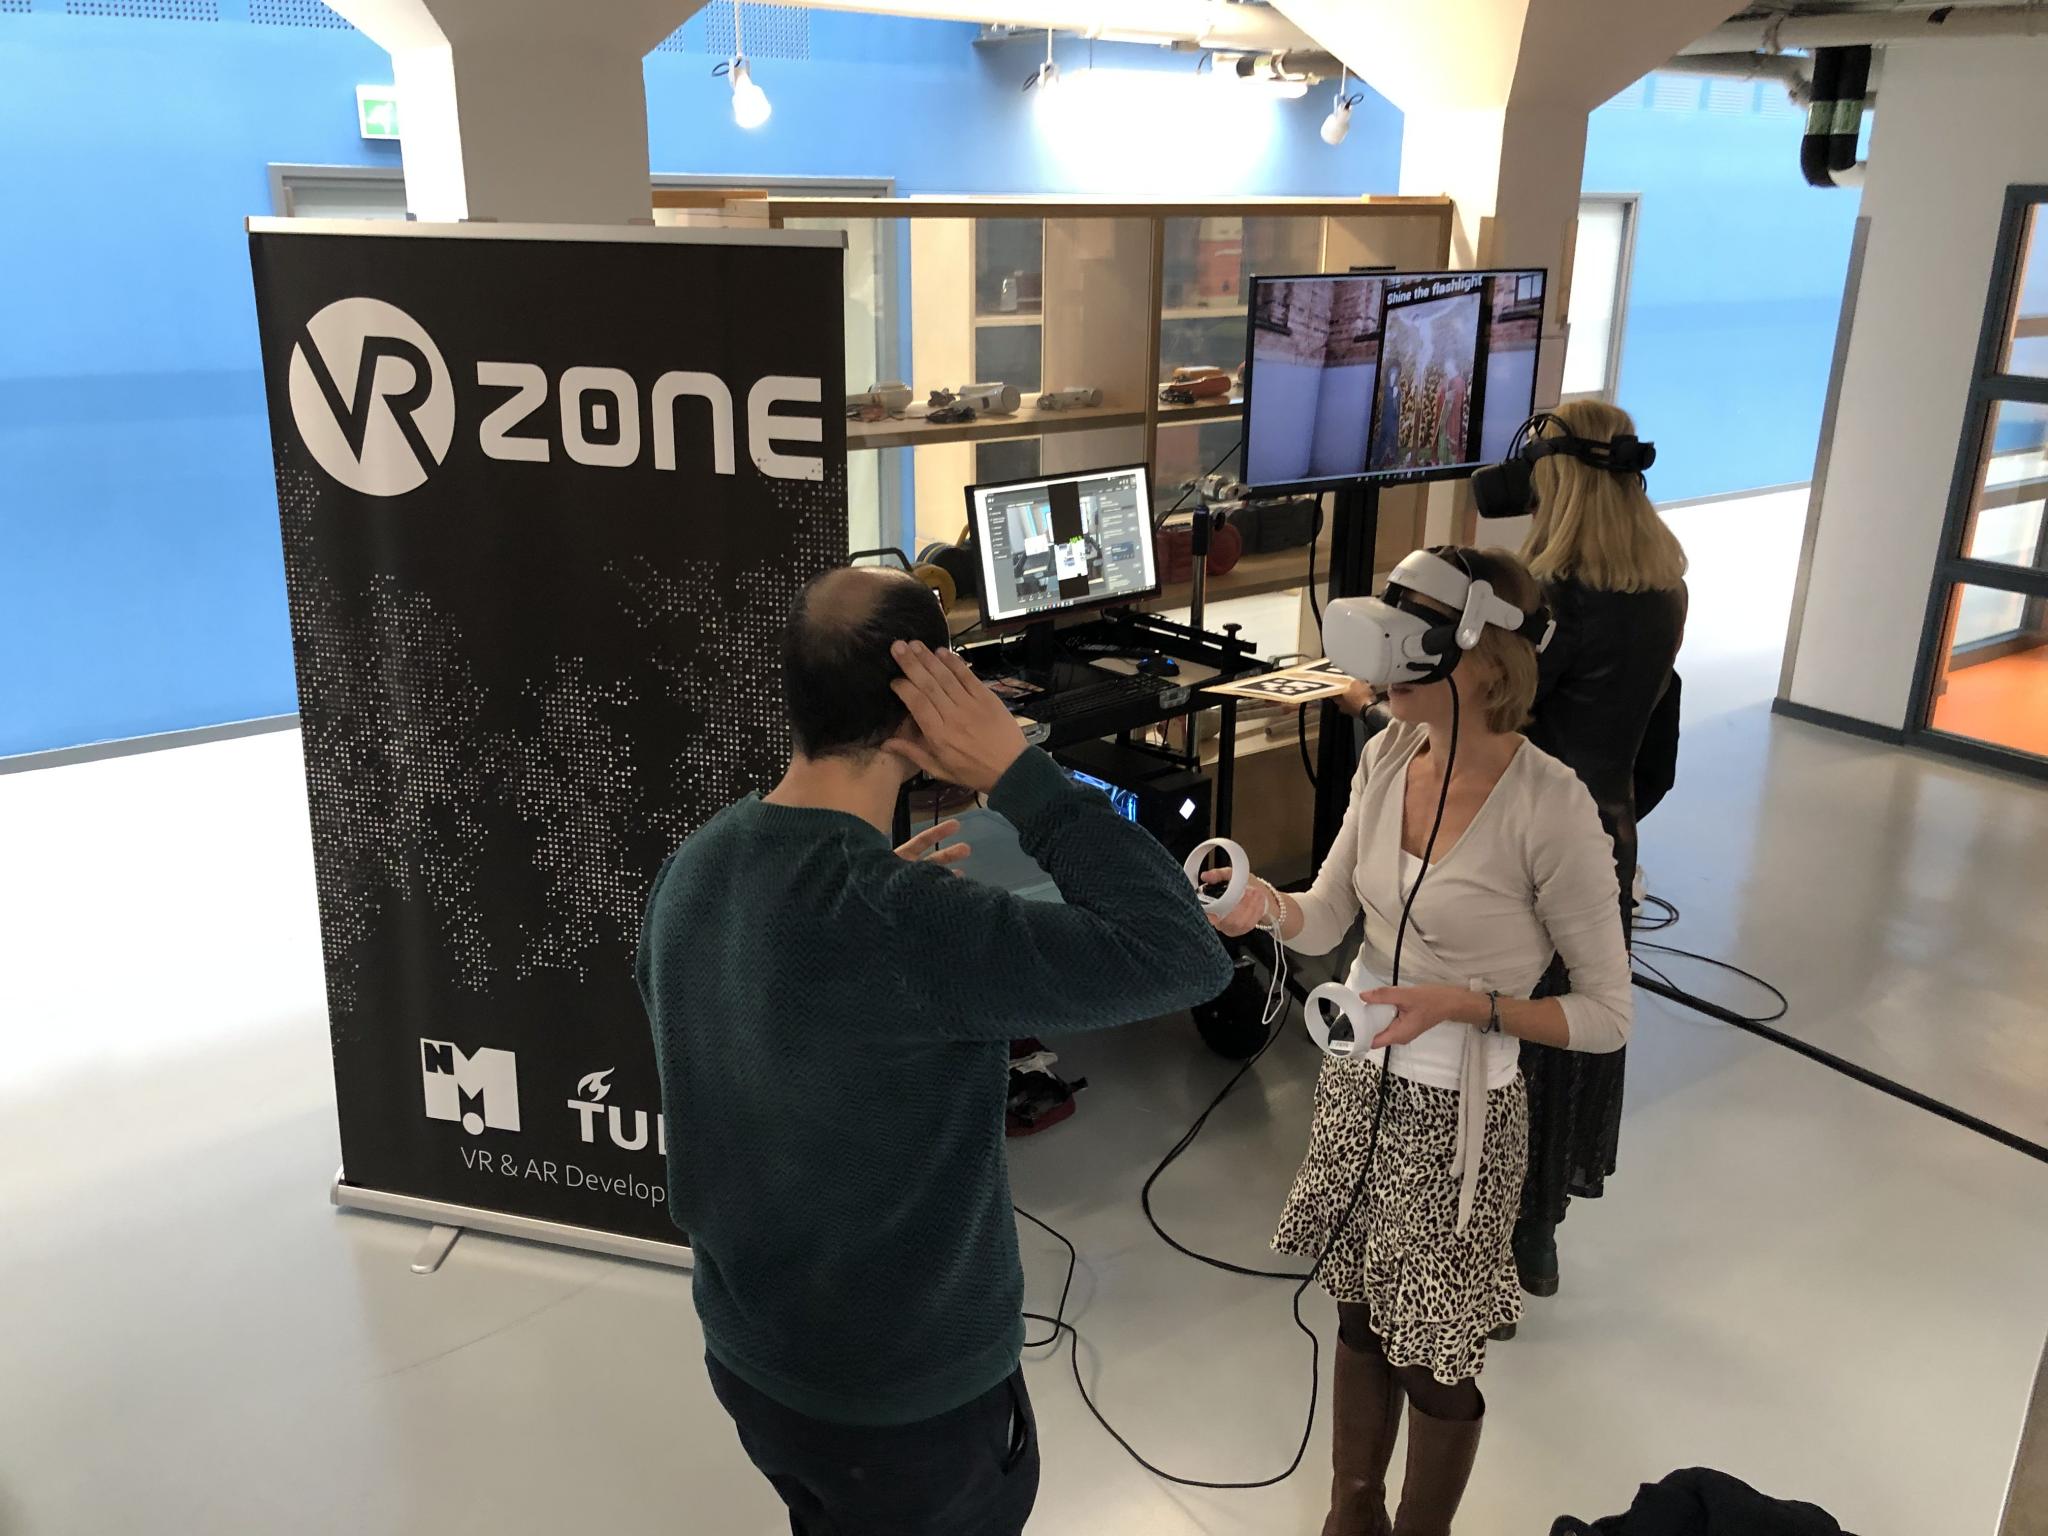 Workshop attendees trying VR from TU Delft VR Lab